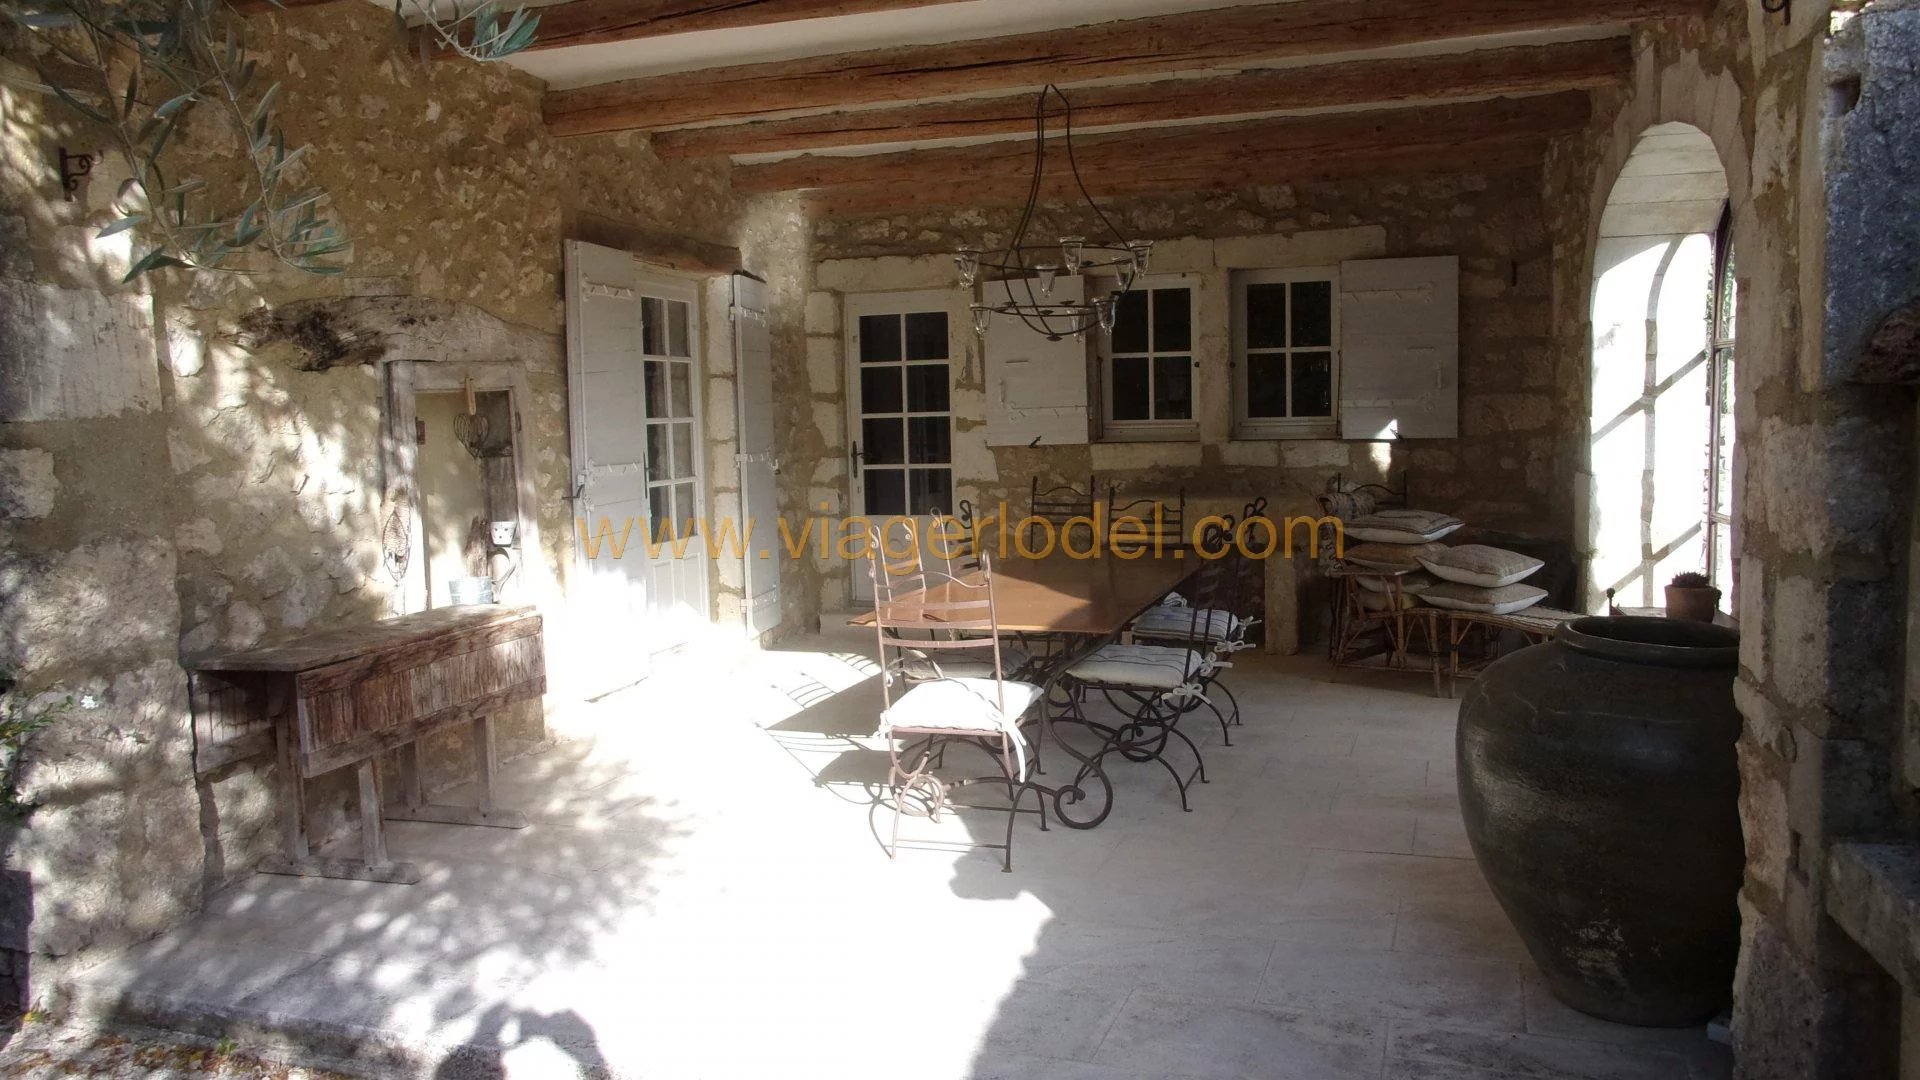 Ref.: 9060 - BARE OWNERSHIP - GOUDARGUES (30) - Occupied house